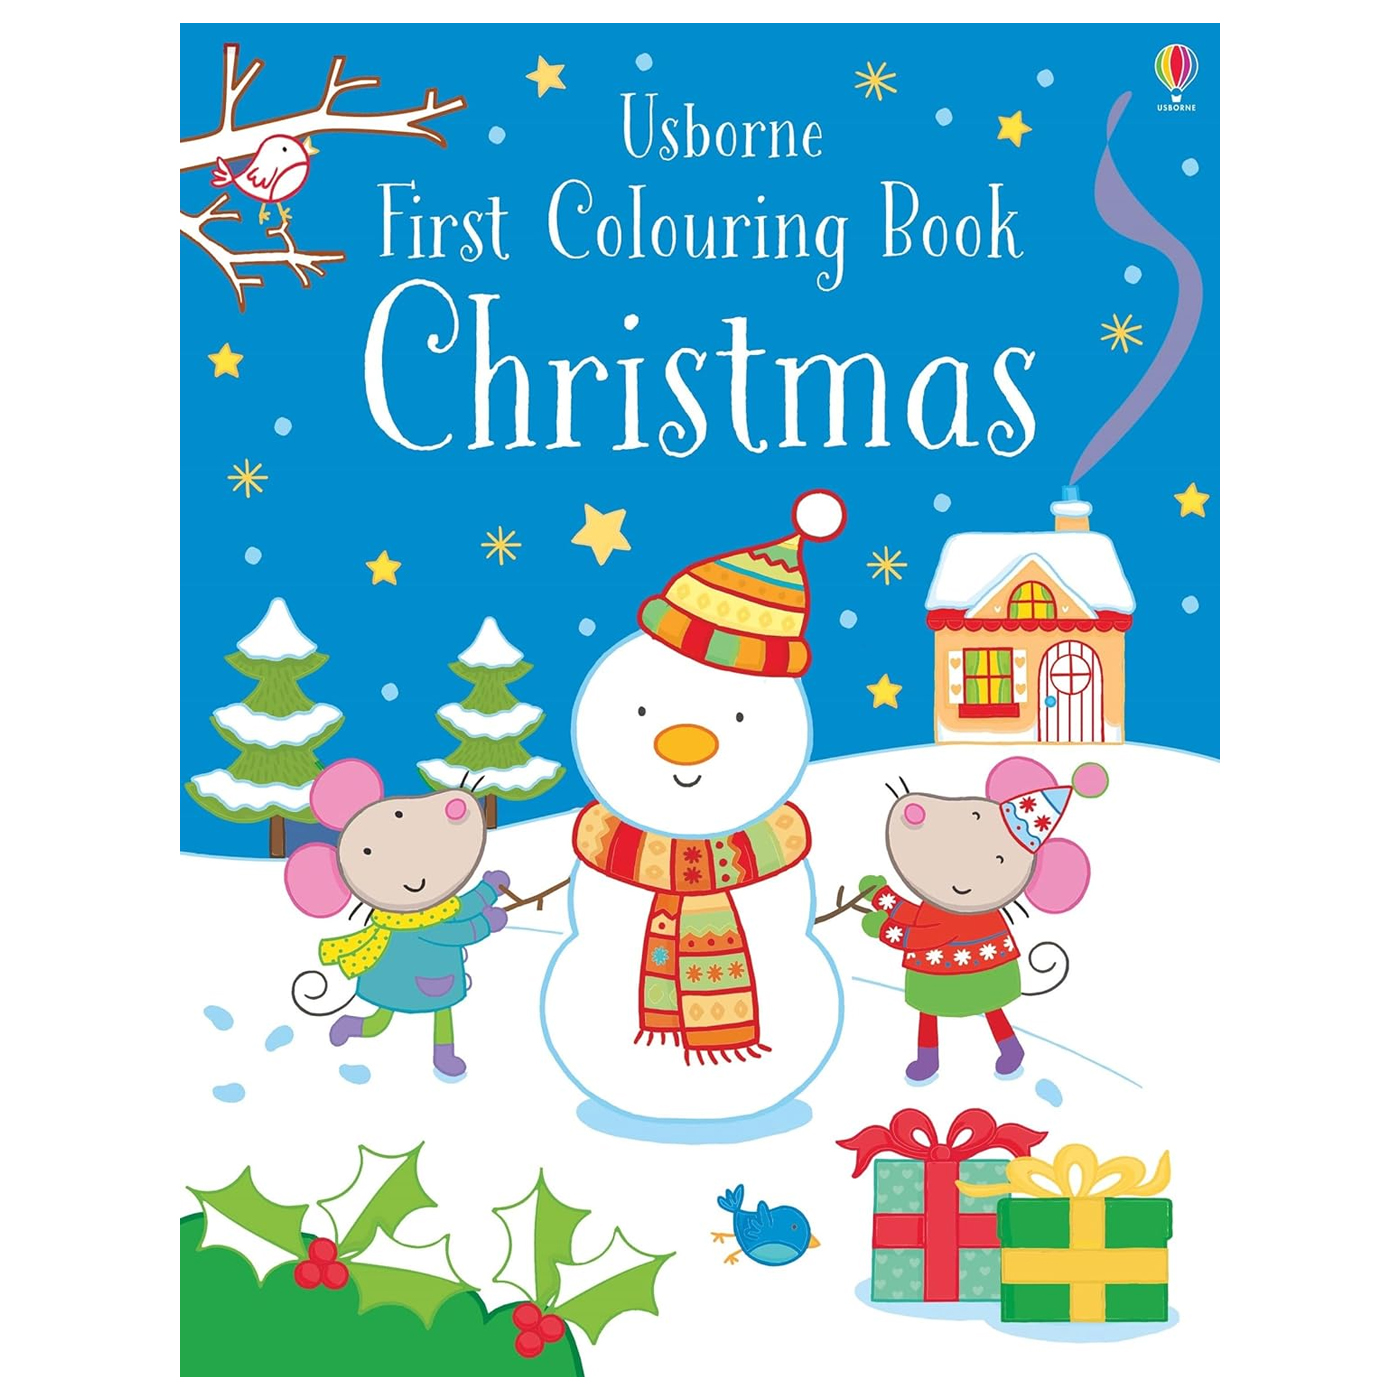  First Colouring Book Christmas